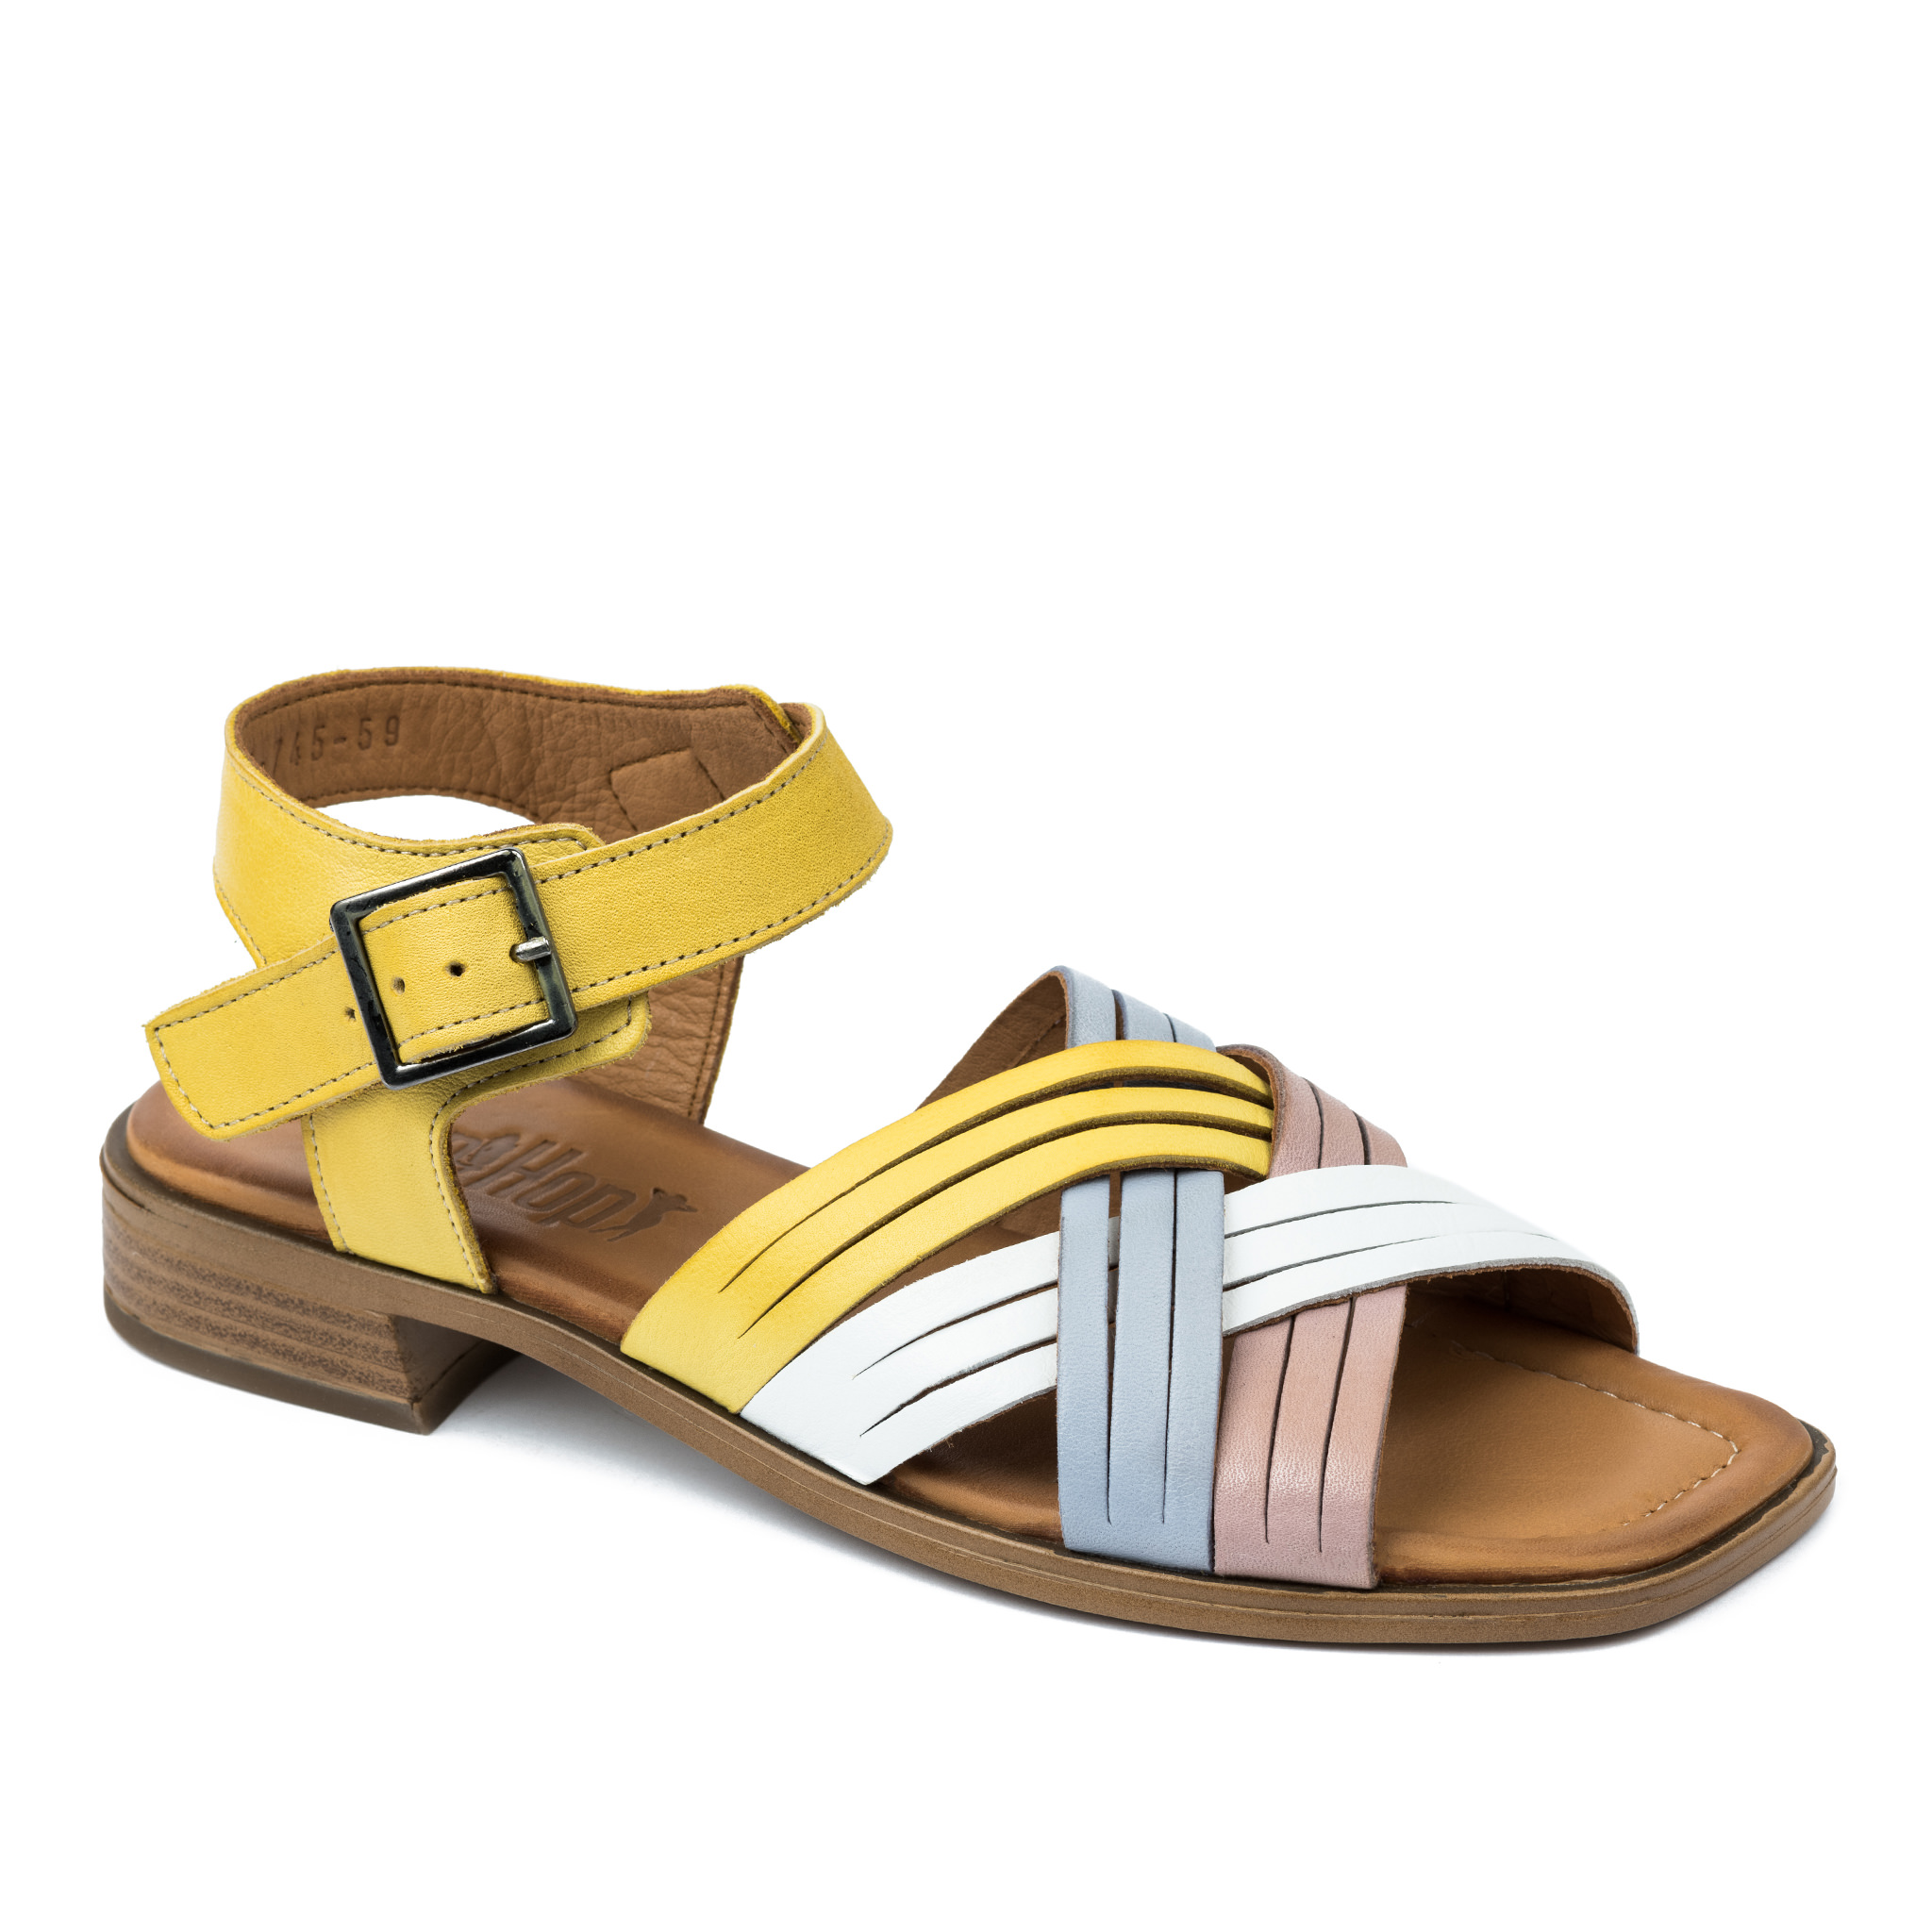 Leather sandals A703 - YELLOW